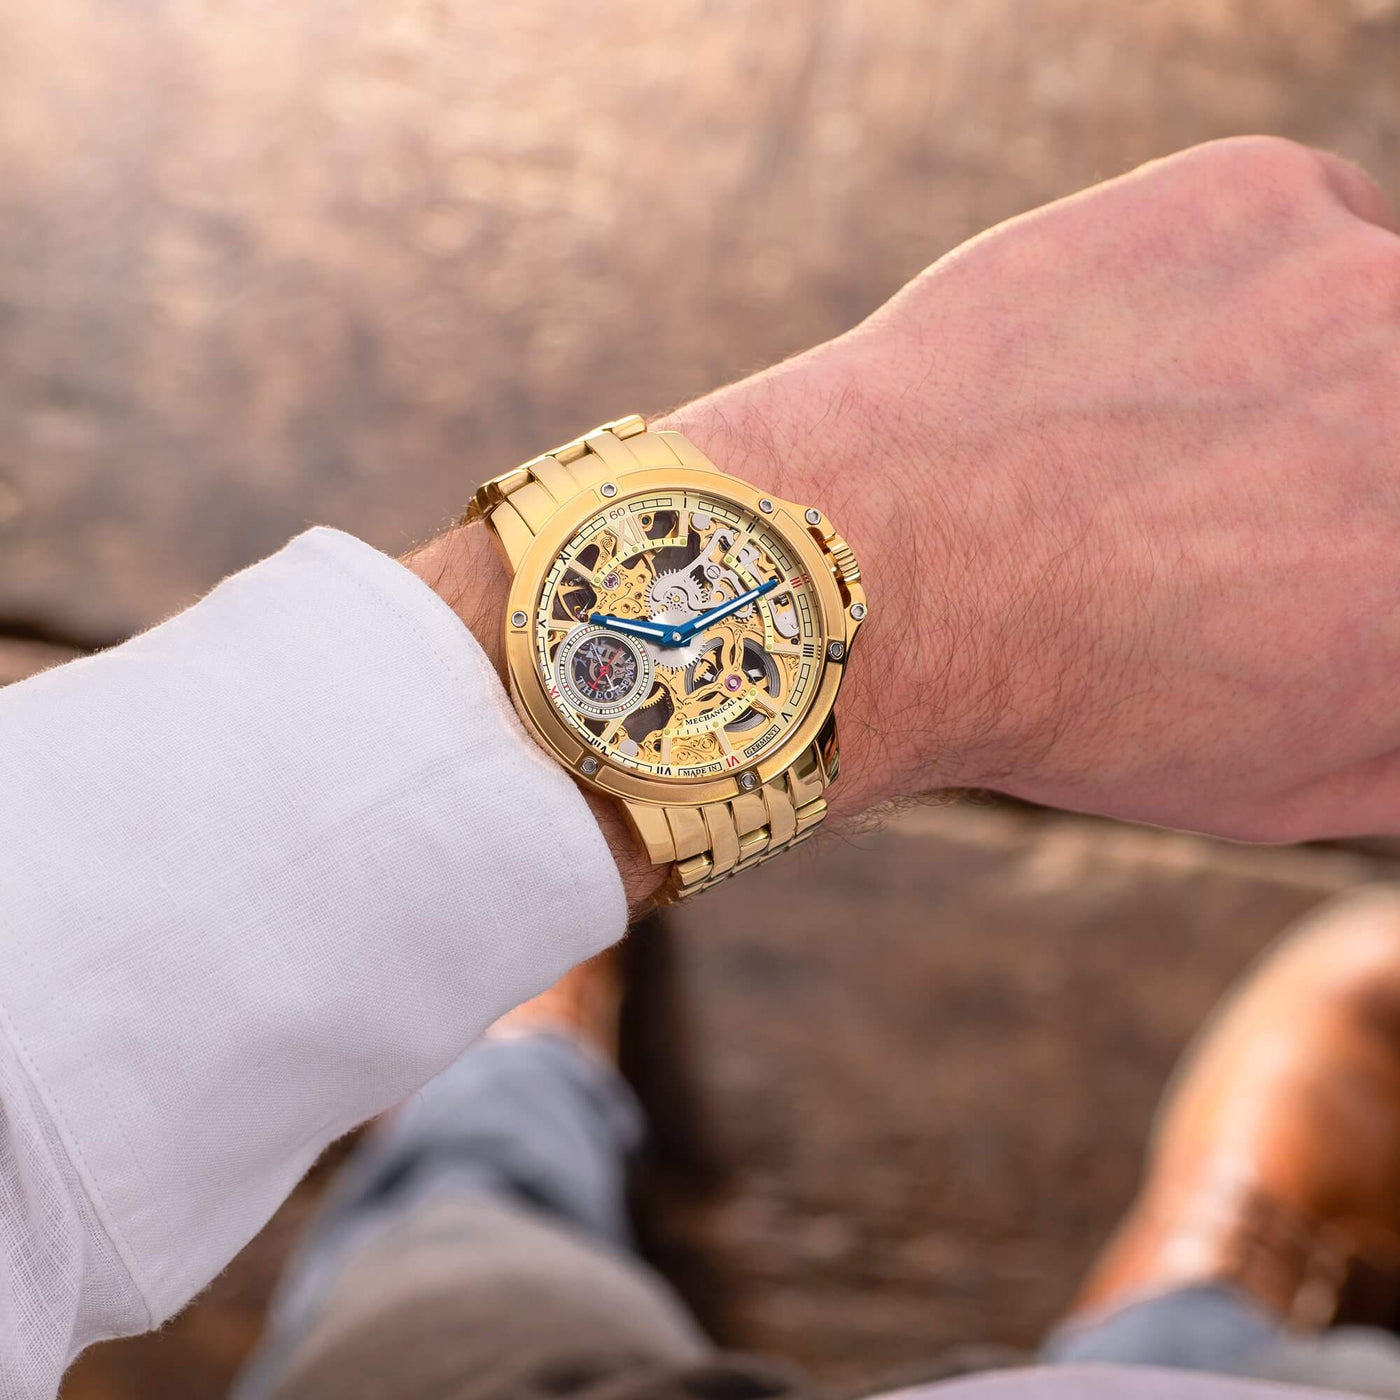 Why Do People Love Mechanical Watches?